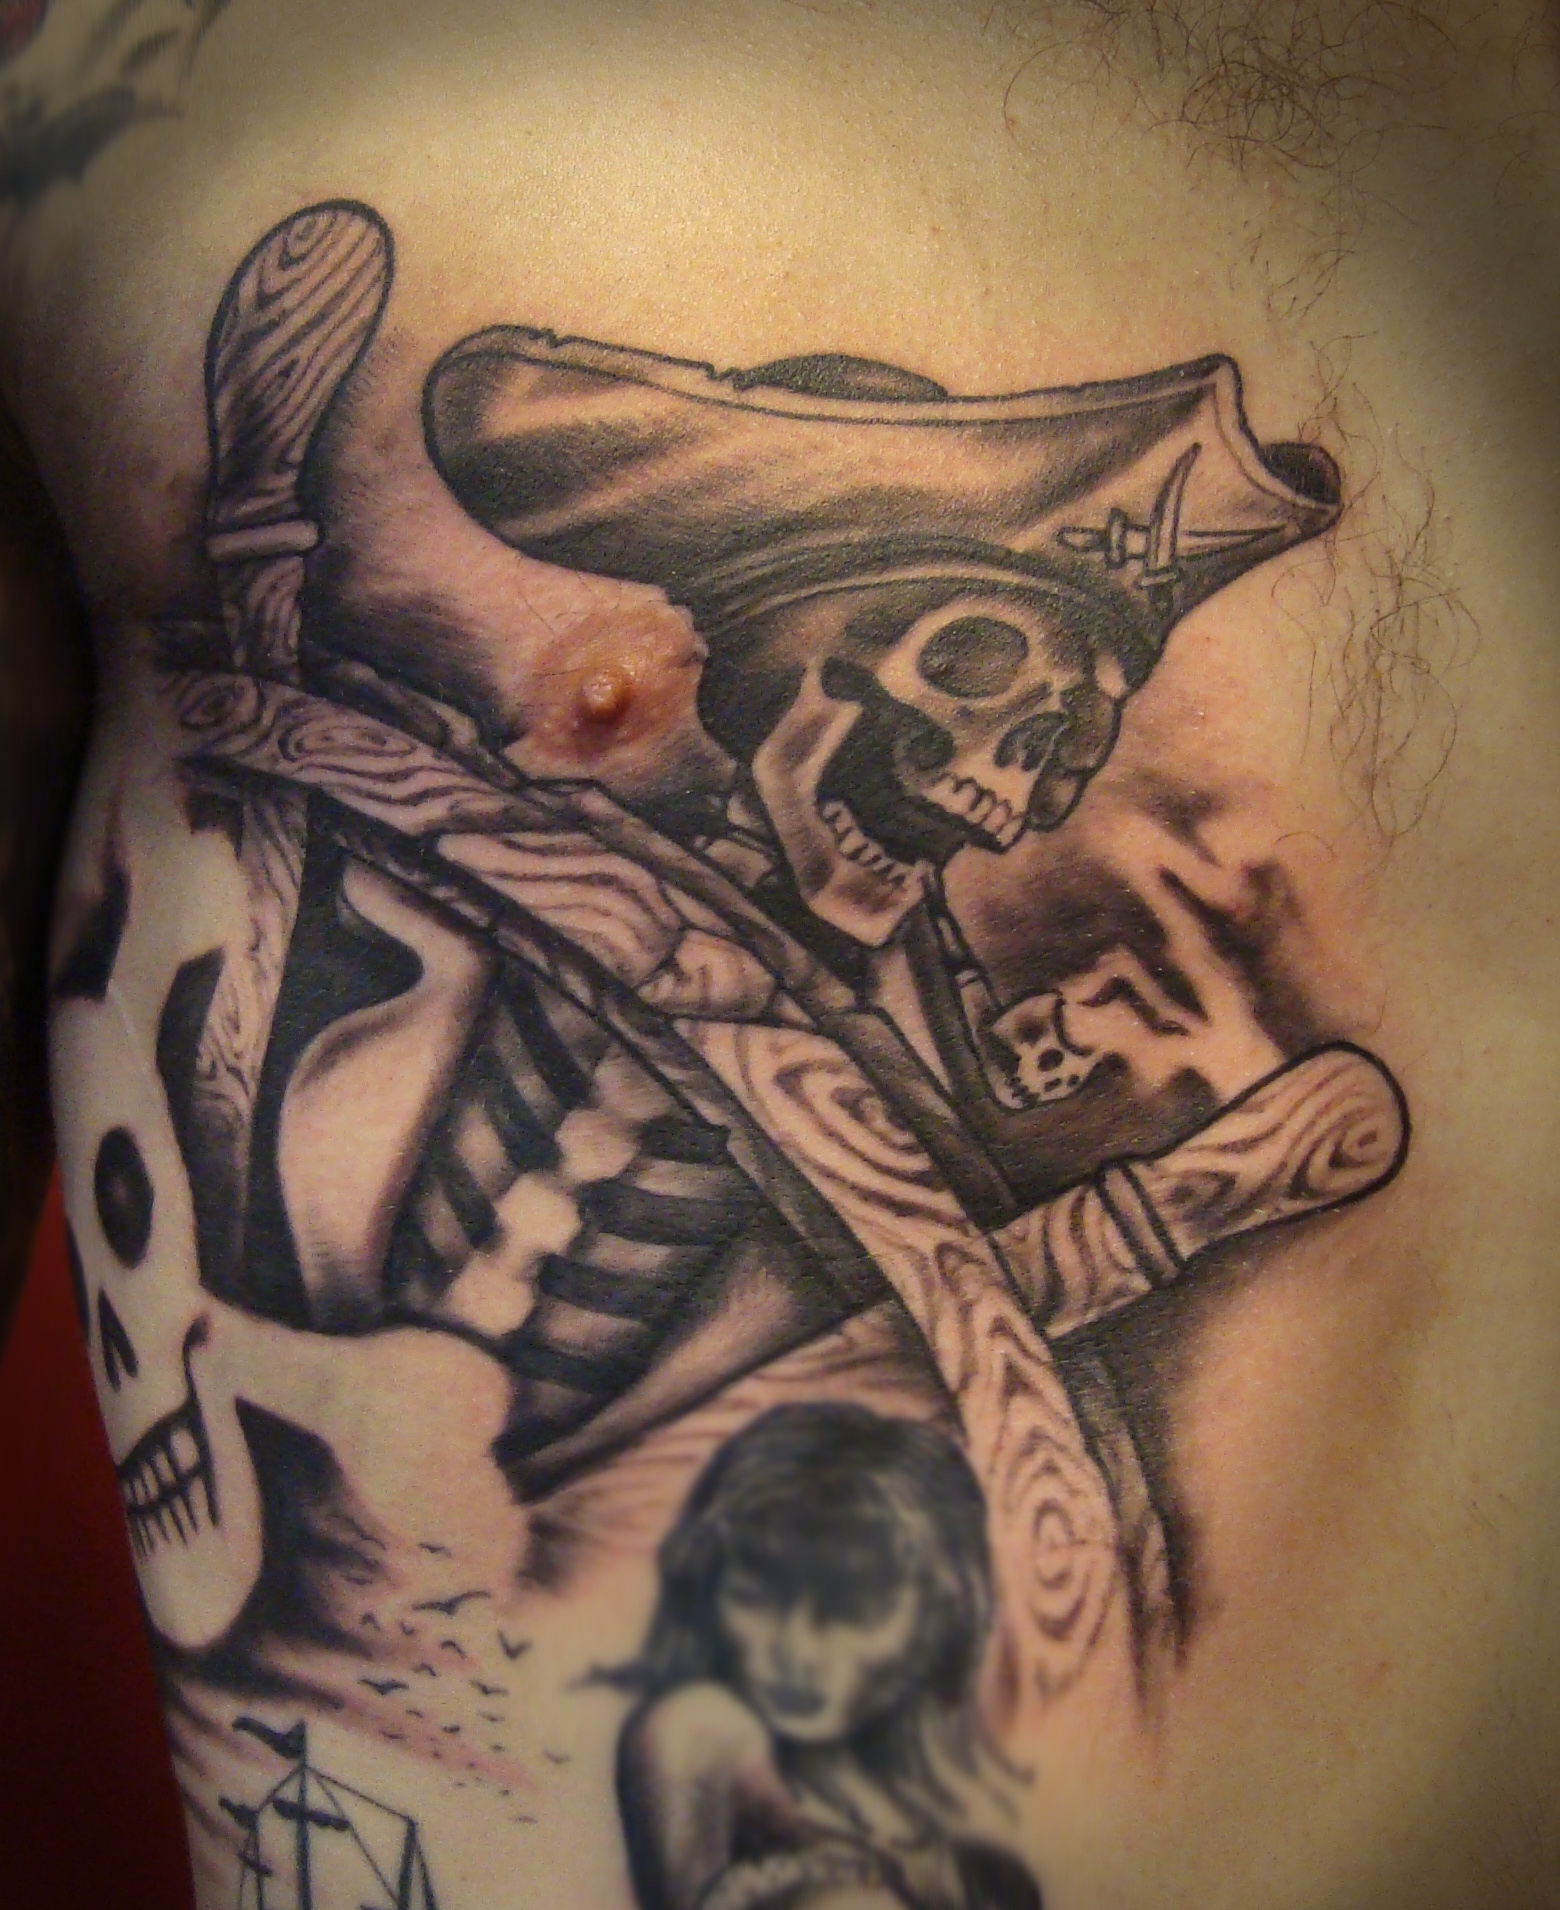 Pirate Tattoos Designs, Ideas and Meaning | Tattoos For You